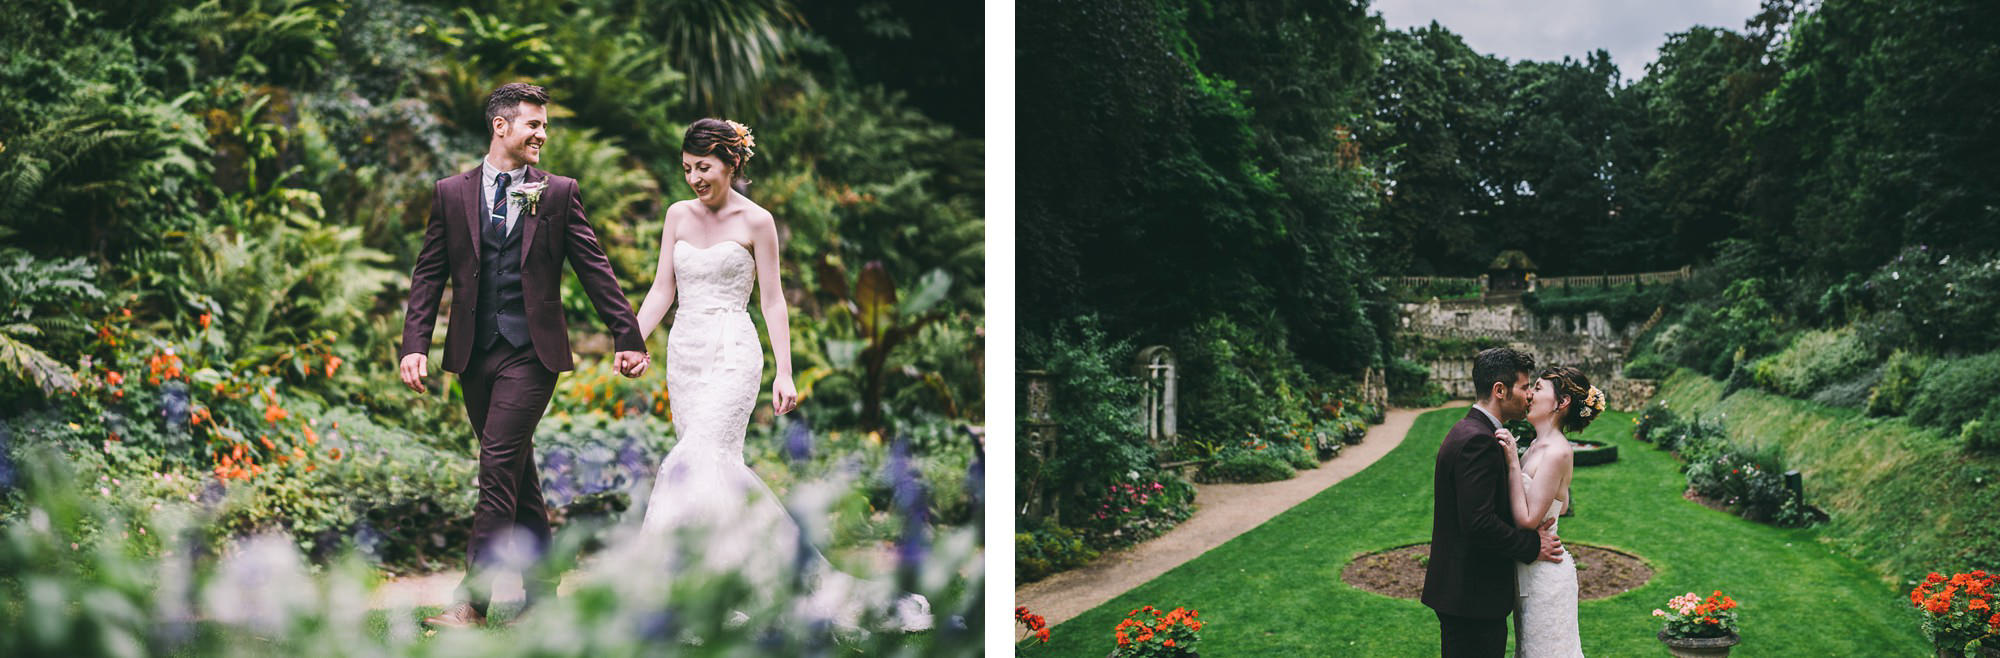 the-georgian-townhouse-norwich-wedding-by-james-powell-photography-032